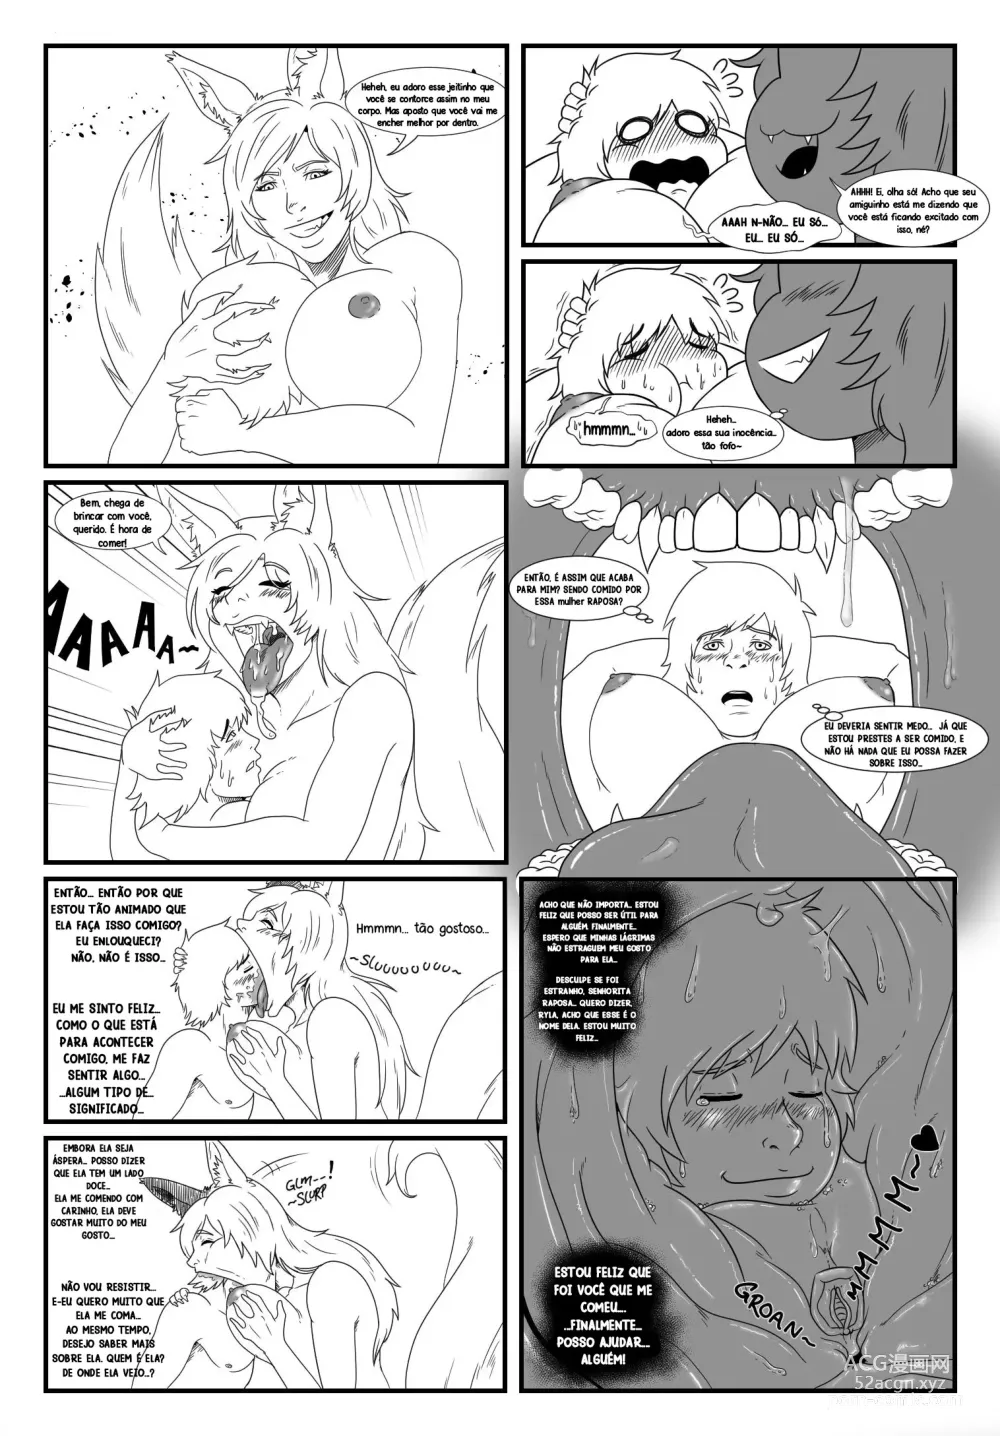 Page 6 of doujinshi A First Time [ CassyInko, CMvoreroom] PT-BR